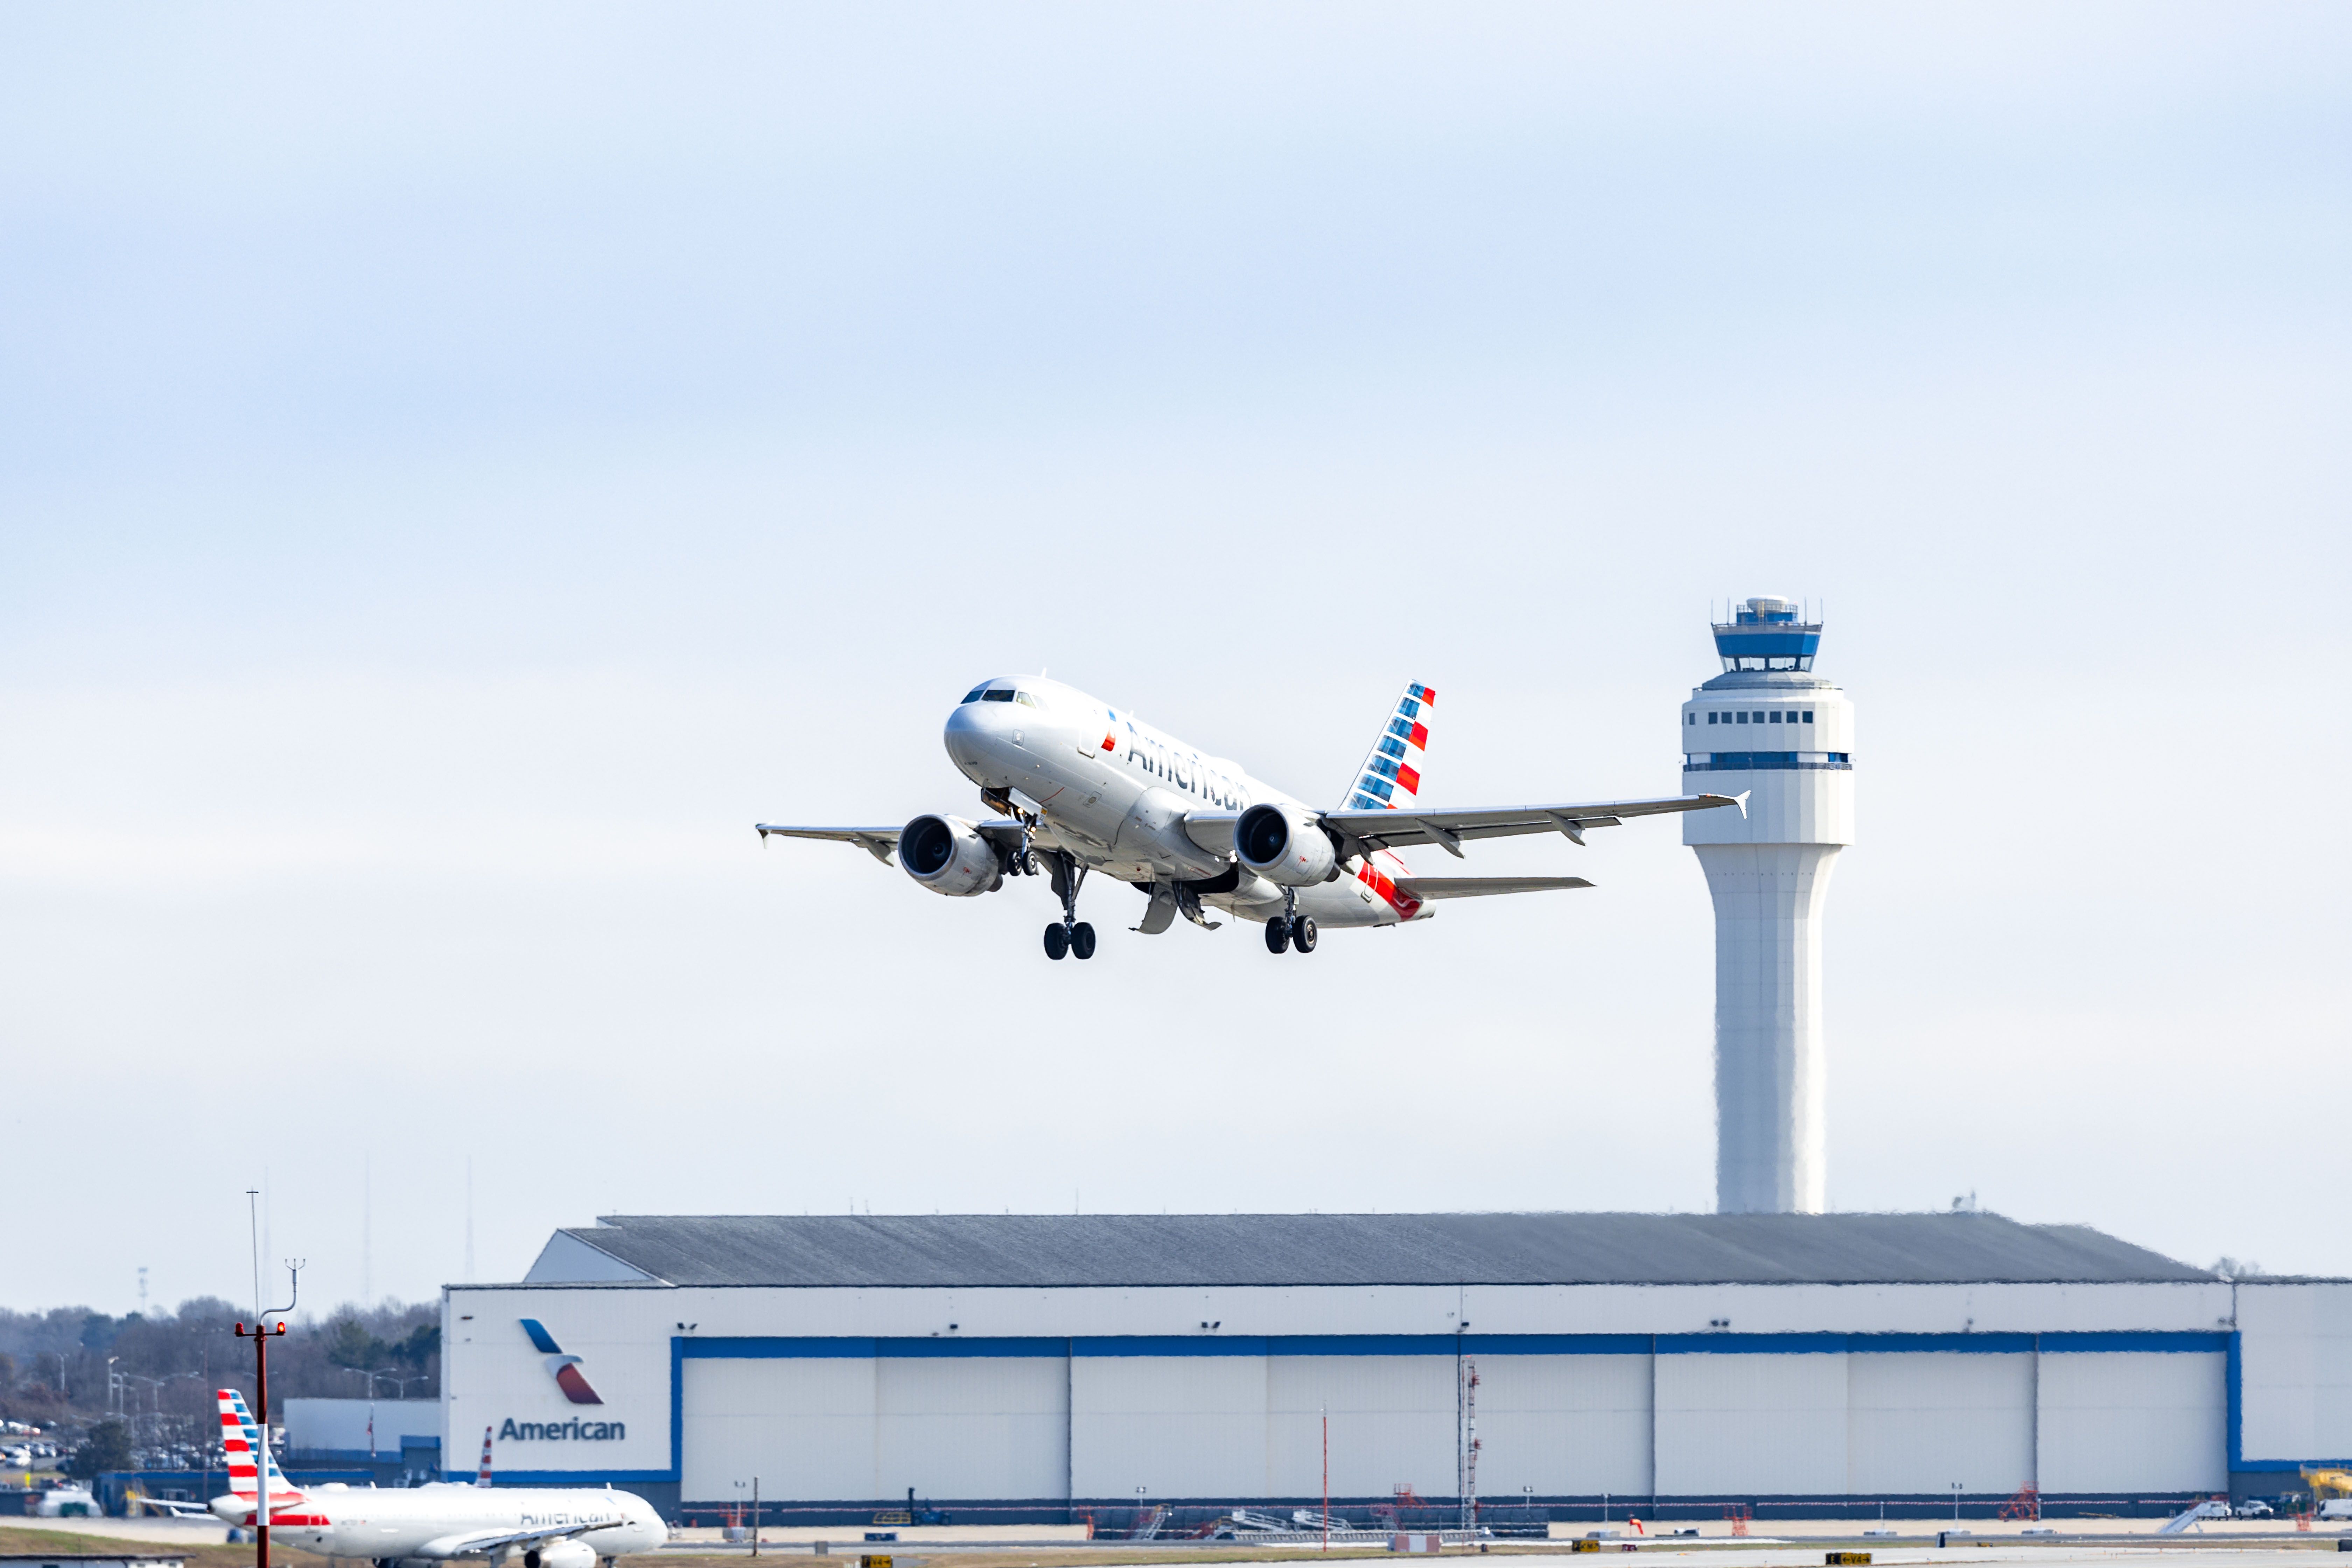 American Airlines Plane Flying by ATC Tower Charlotte Douglas Airport